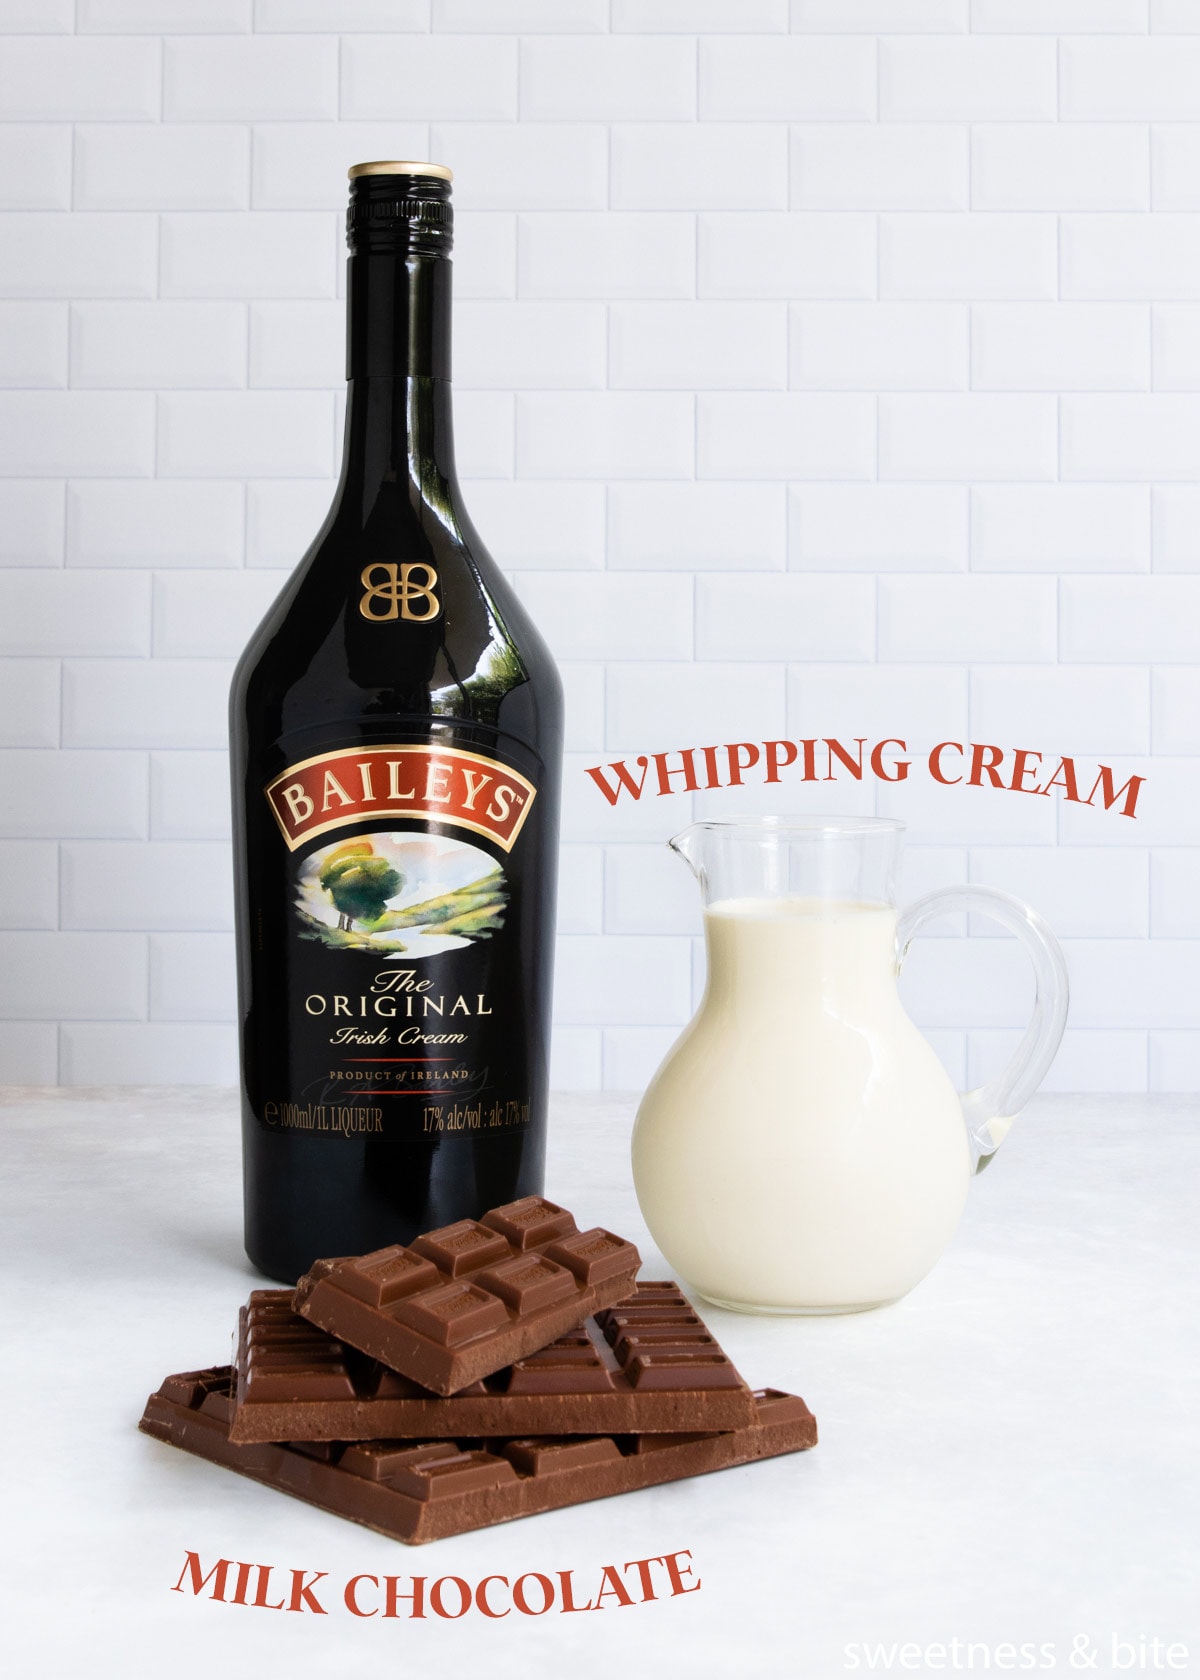 The baileys mousse ingredients - milk chocolate, whipping cream and baileys irish cream, on a white tiled background.